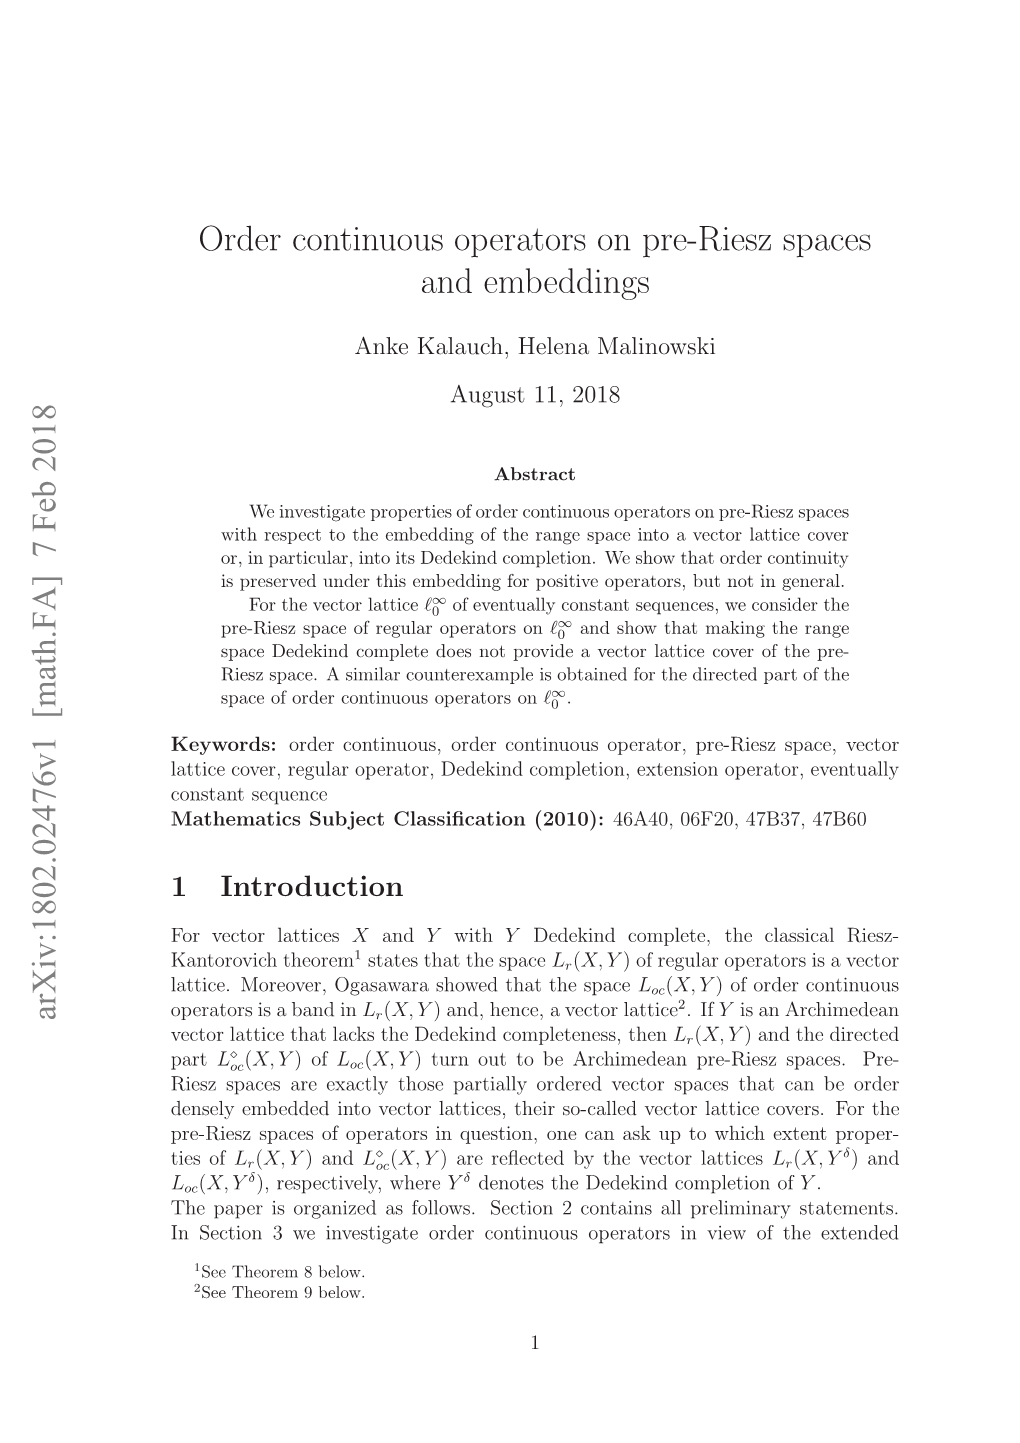 Order Continuous Operators on Pre-Riesz Spaces and Embeddings